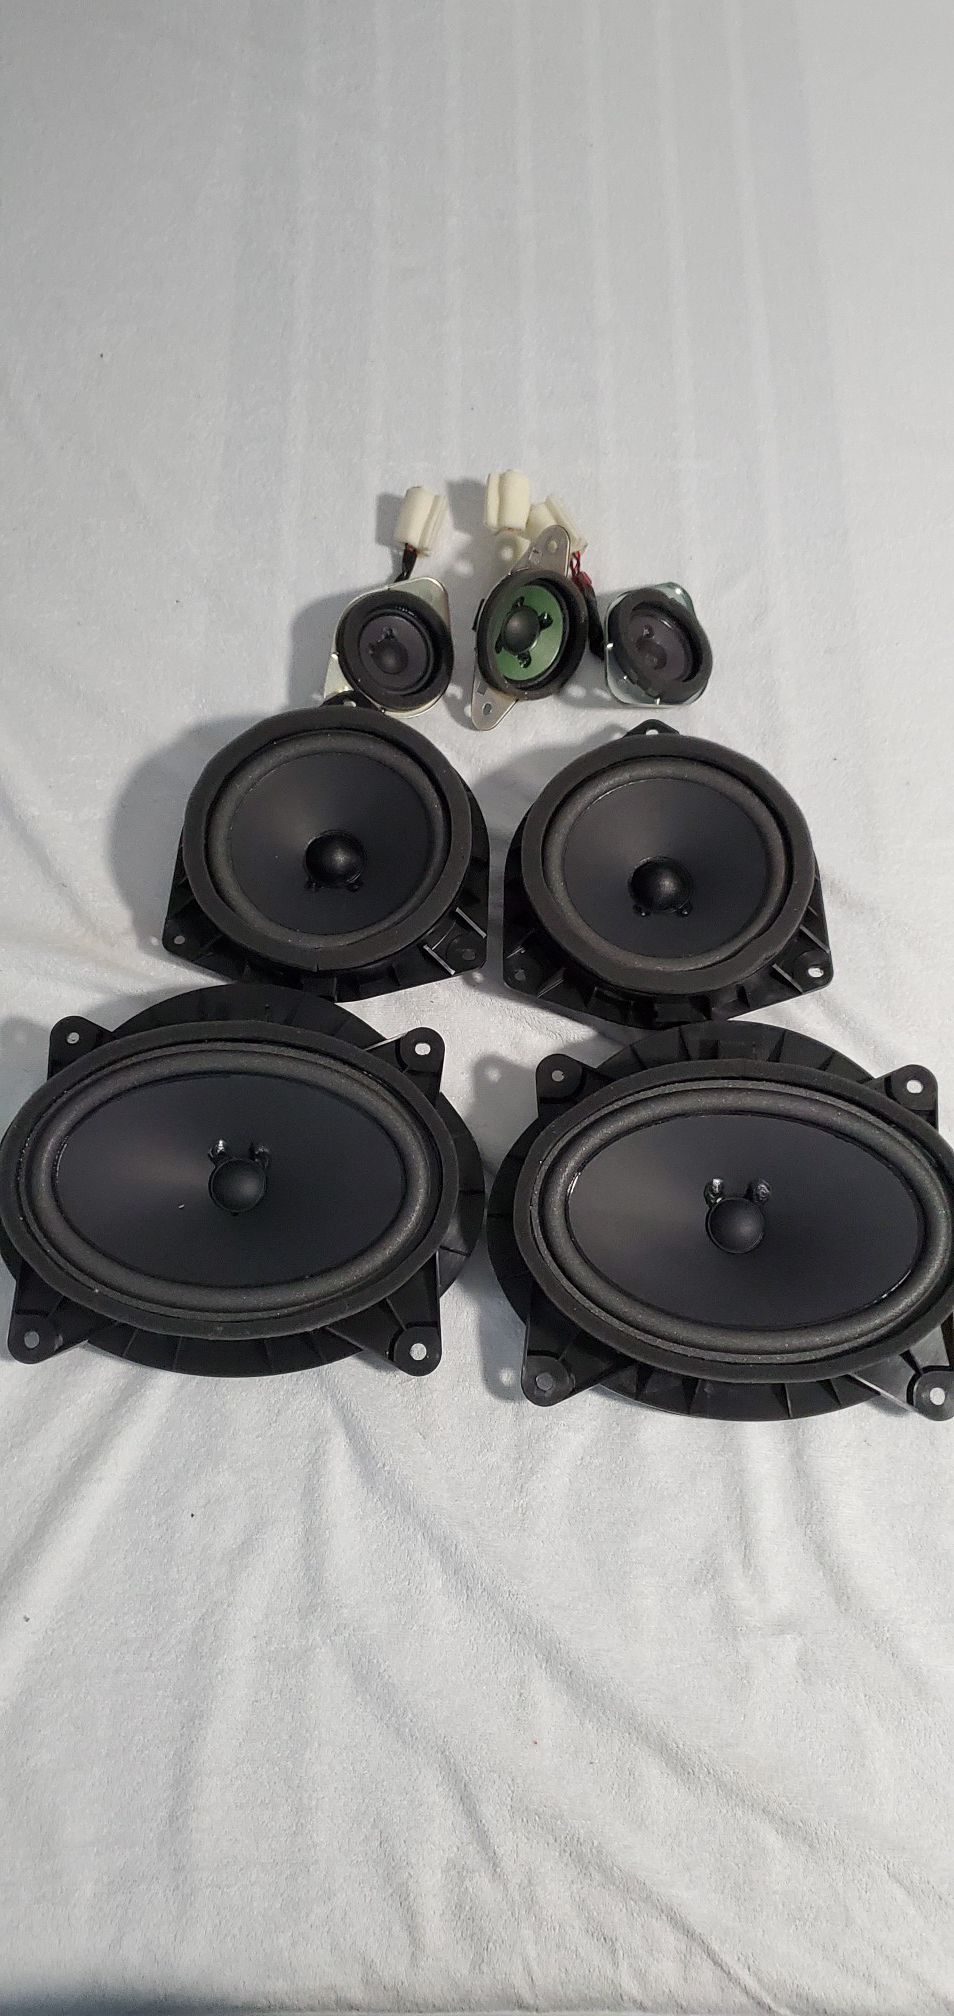 2020 Tundra speakers system complete